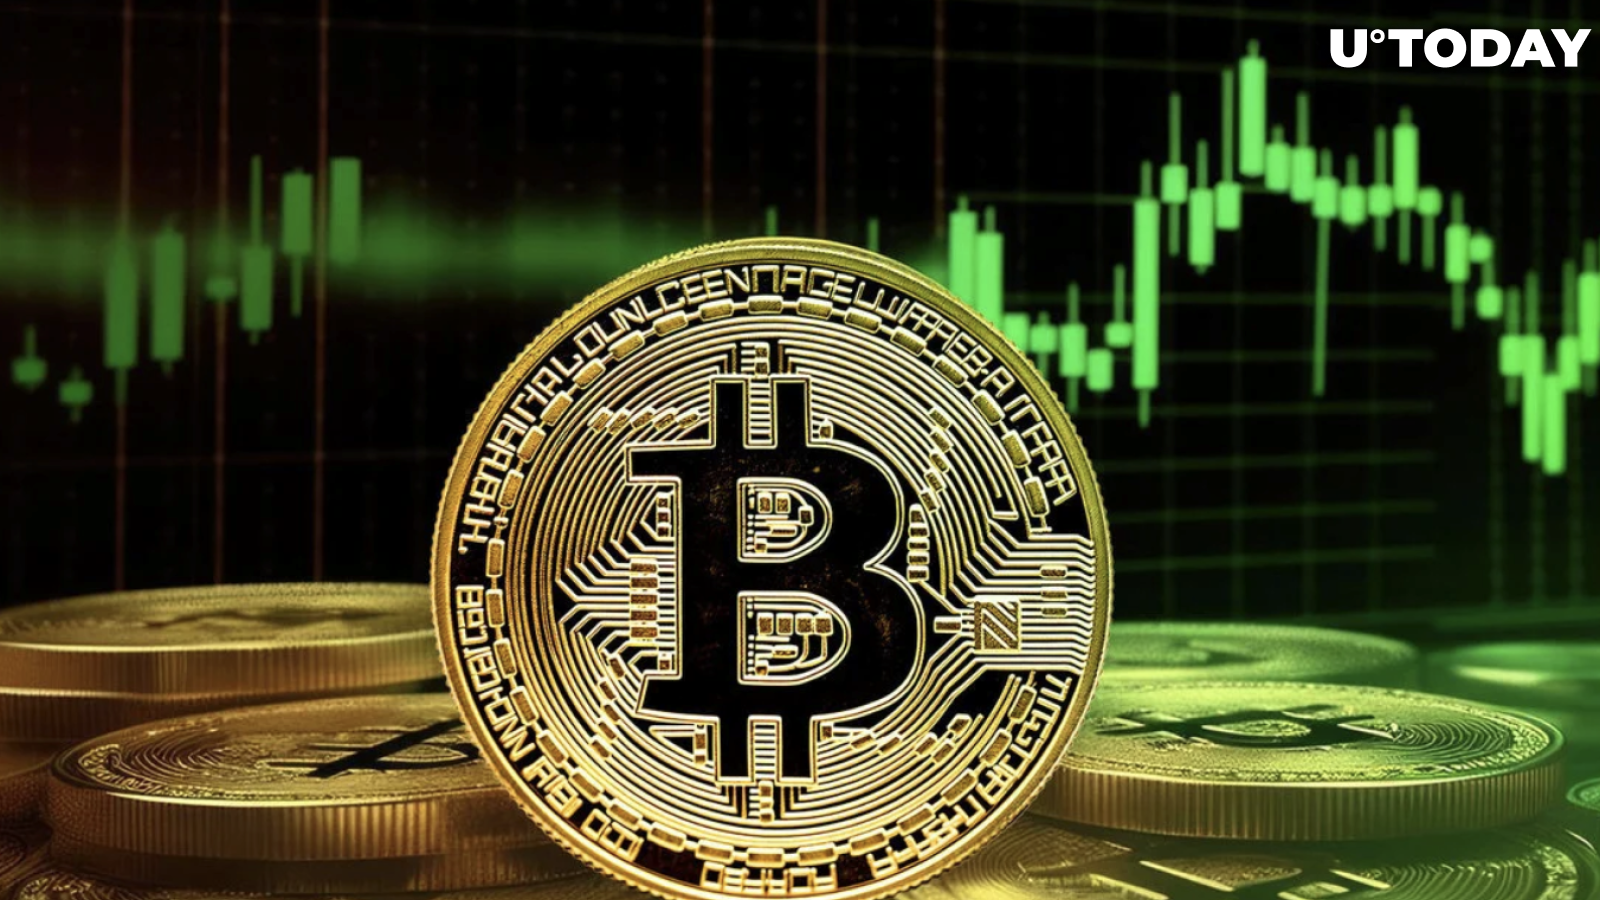 Bitcoin (BTC) Price Could See $48,000, Top Trader Says